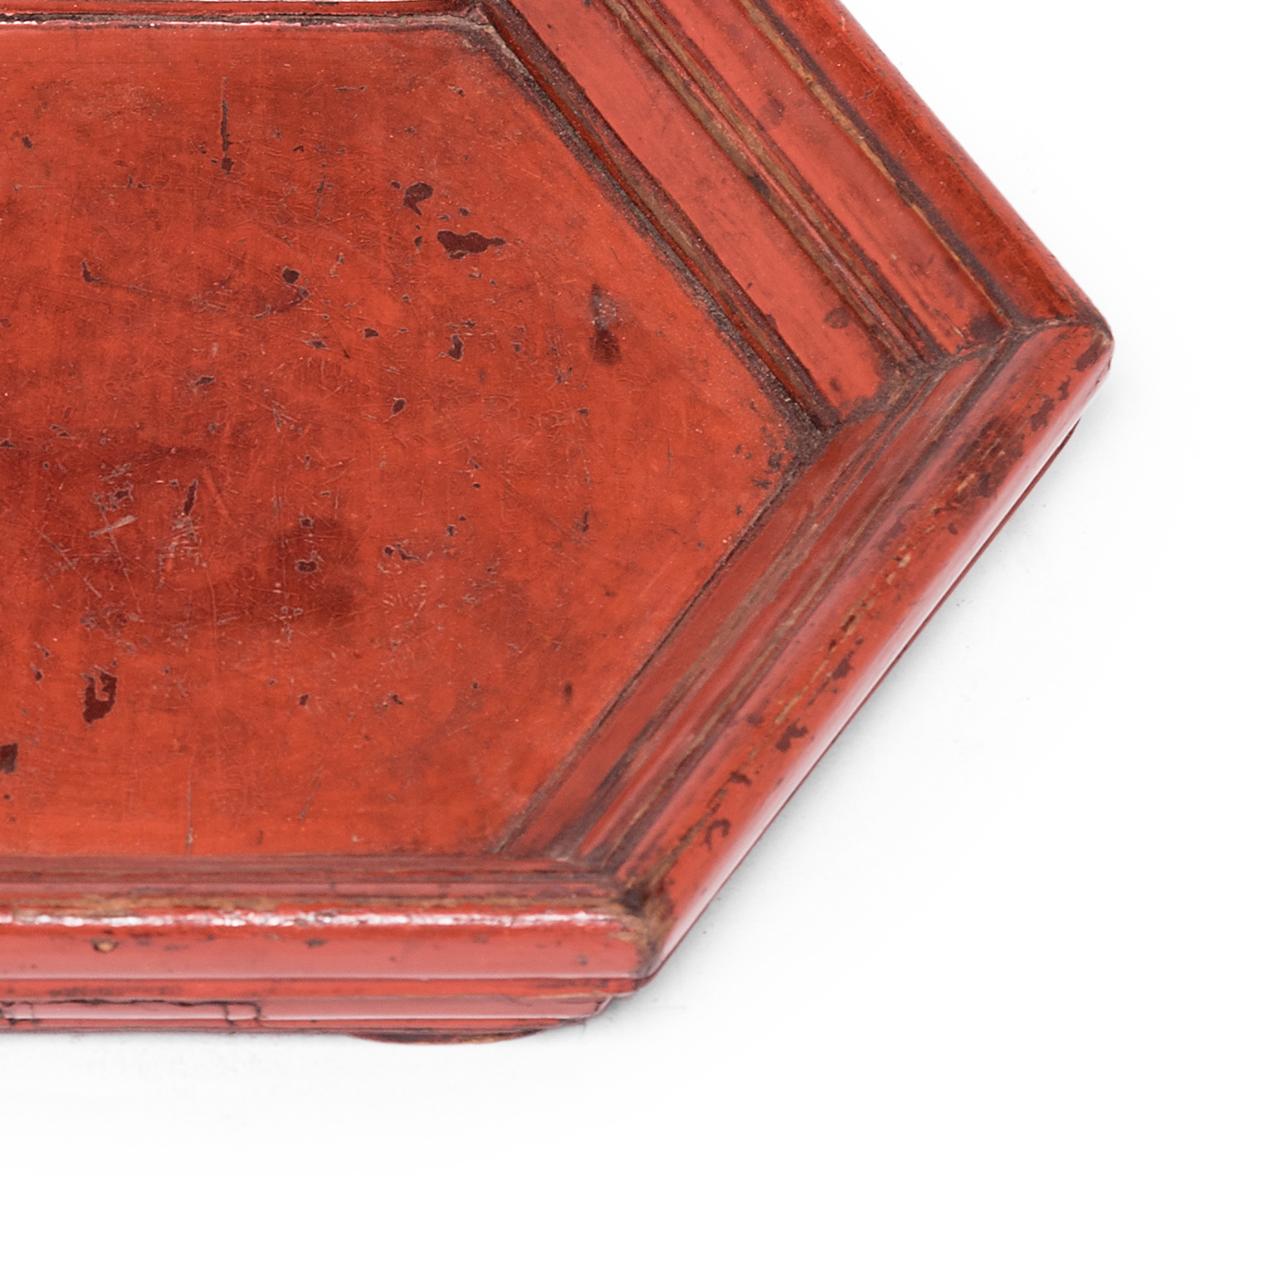 Lacquered Chinese Cinnabar Red Honeycomb Tray, c. 1900